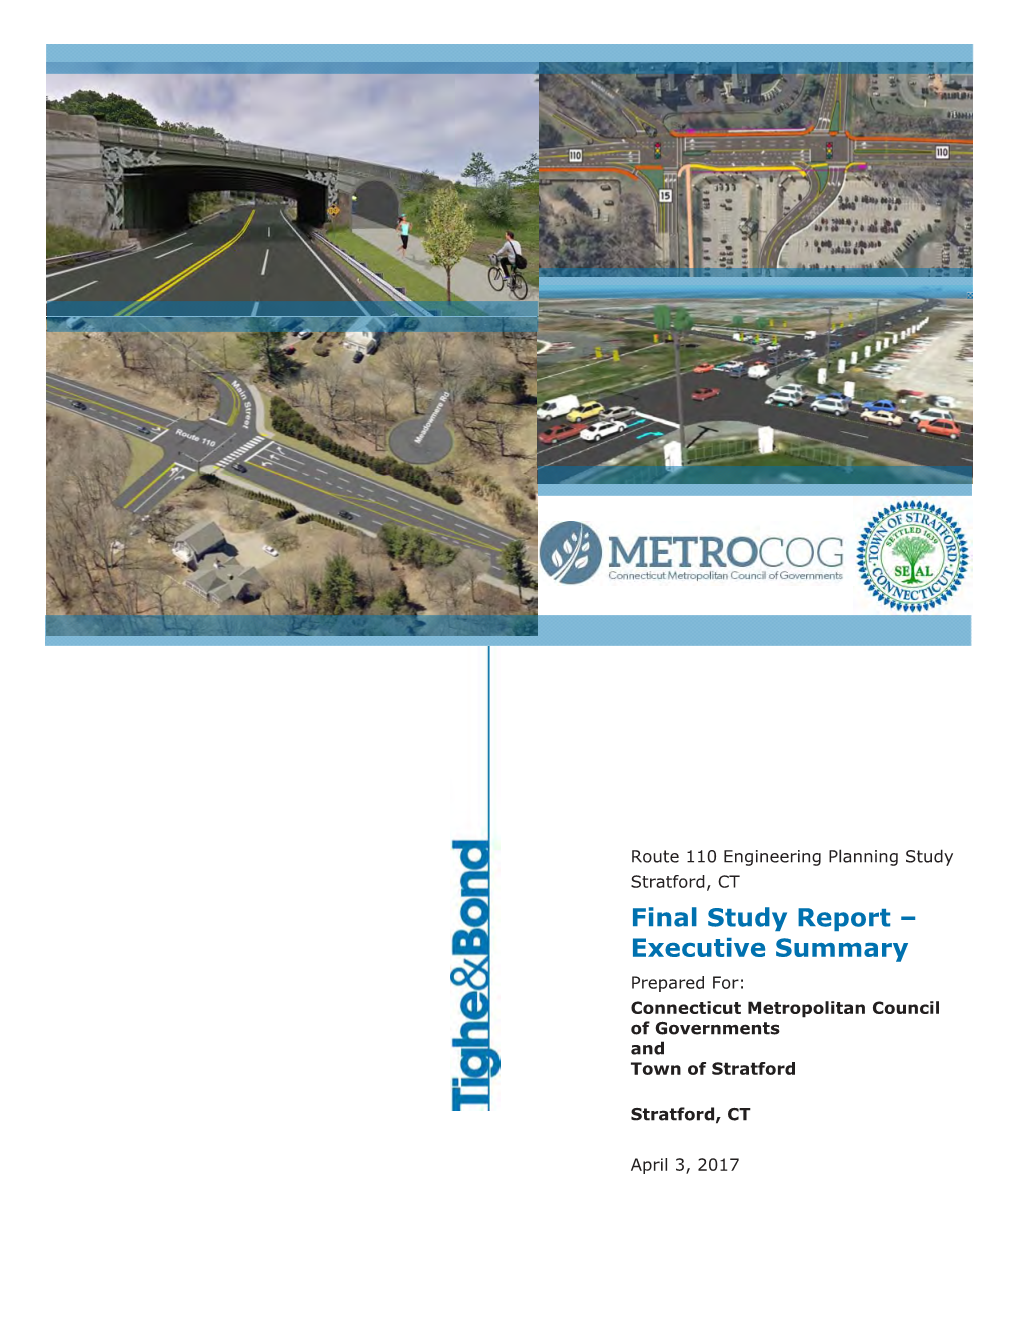 Final Study Report – Executive Summary Prepared For: Connecticut Metropolitan Council of Governments and Town of Stratford